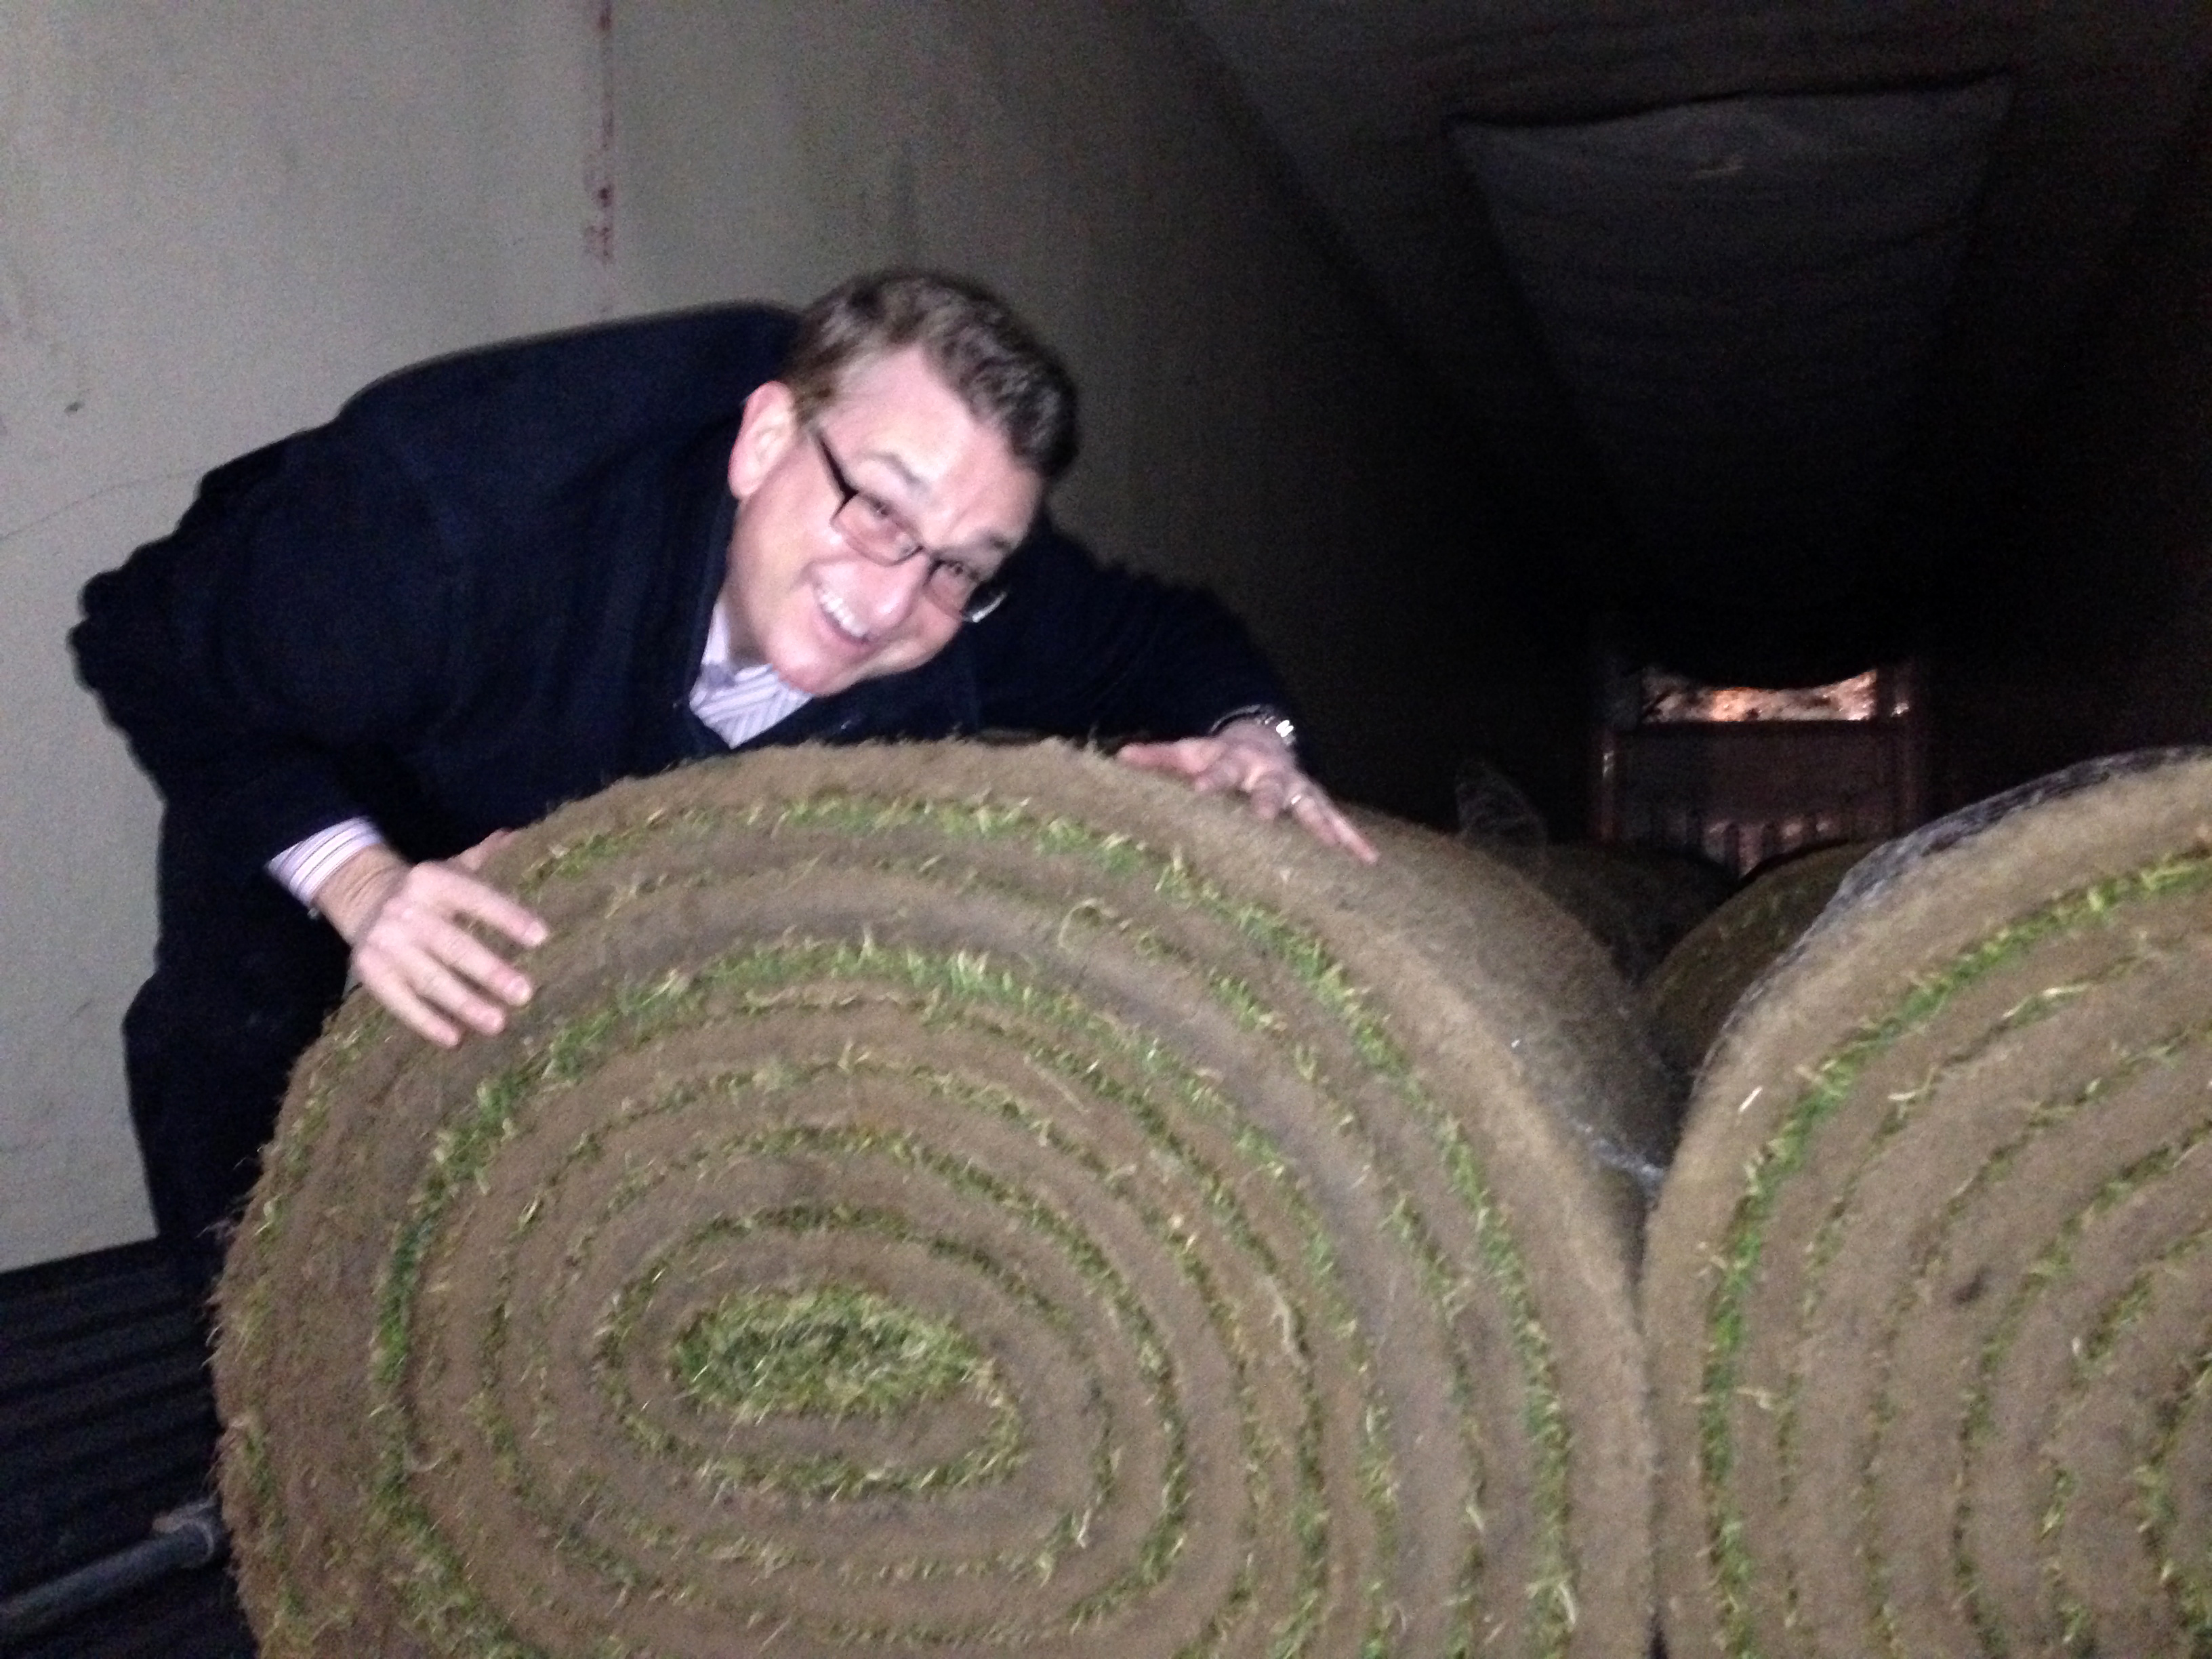 WWJ's Charlie Langton just couldn't keep his hands off of the fresh Kentucky bluegrass, soon to cover the field at Comerica Park. (Credit: WWJ Newsradio 950)